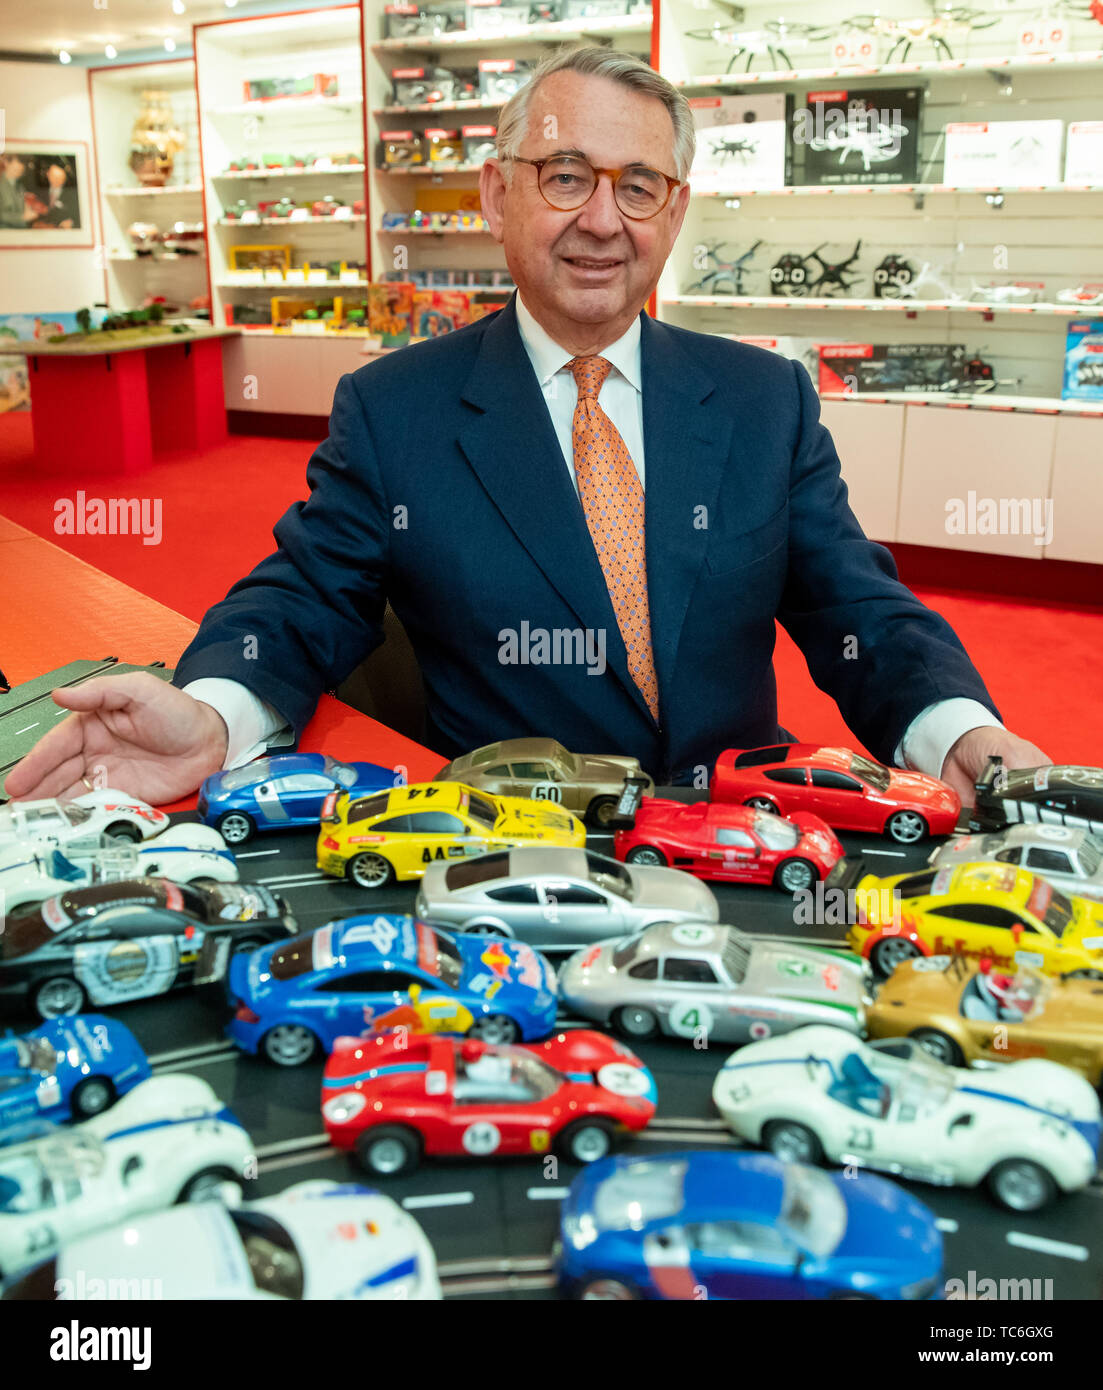 Nuremberg, Germany. 28th May, 2019. Kurt Hesse, CEO of Autec AG, sits in his company's showroom in front of remote-controlled vehicles. A dispute over the design of the Porsche 911 and the VW Caddy and T5 models is occupying the EU judges in Luxembourg. The case is attributable to the two model car manufacturers Autec and Rietze. At the EU Intellectual Property Office in Alicante, they had the so-called design patents, which protect the appearance of the vehicles throughout Europe, cancelled. Credit: Daniel Karmann/dpa/Alamy Live News Stock Photo